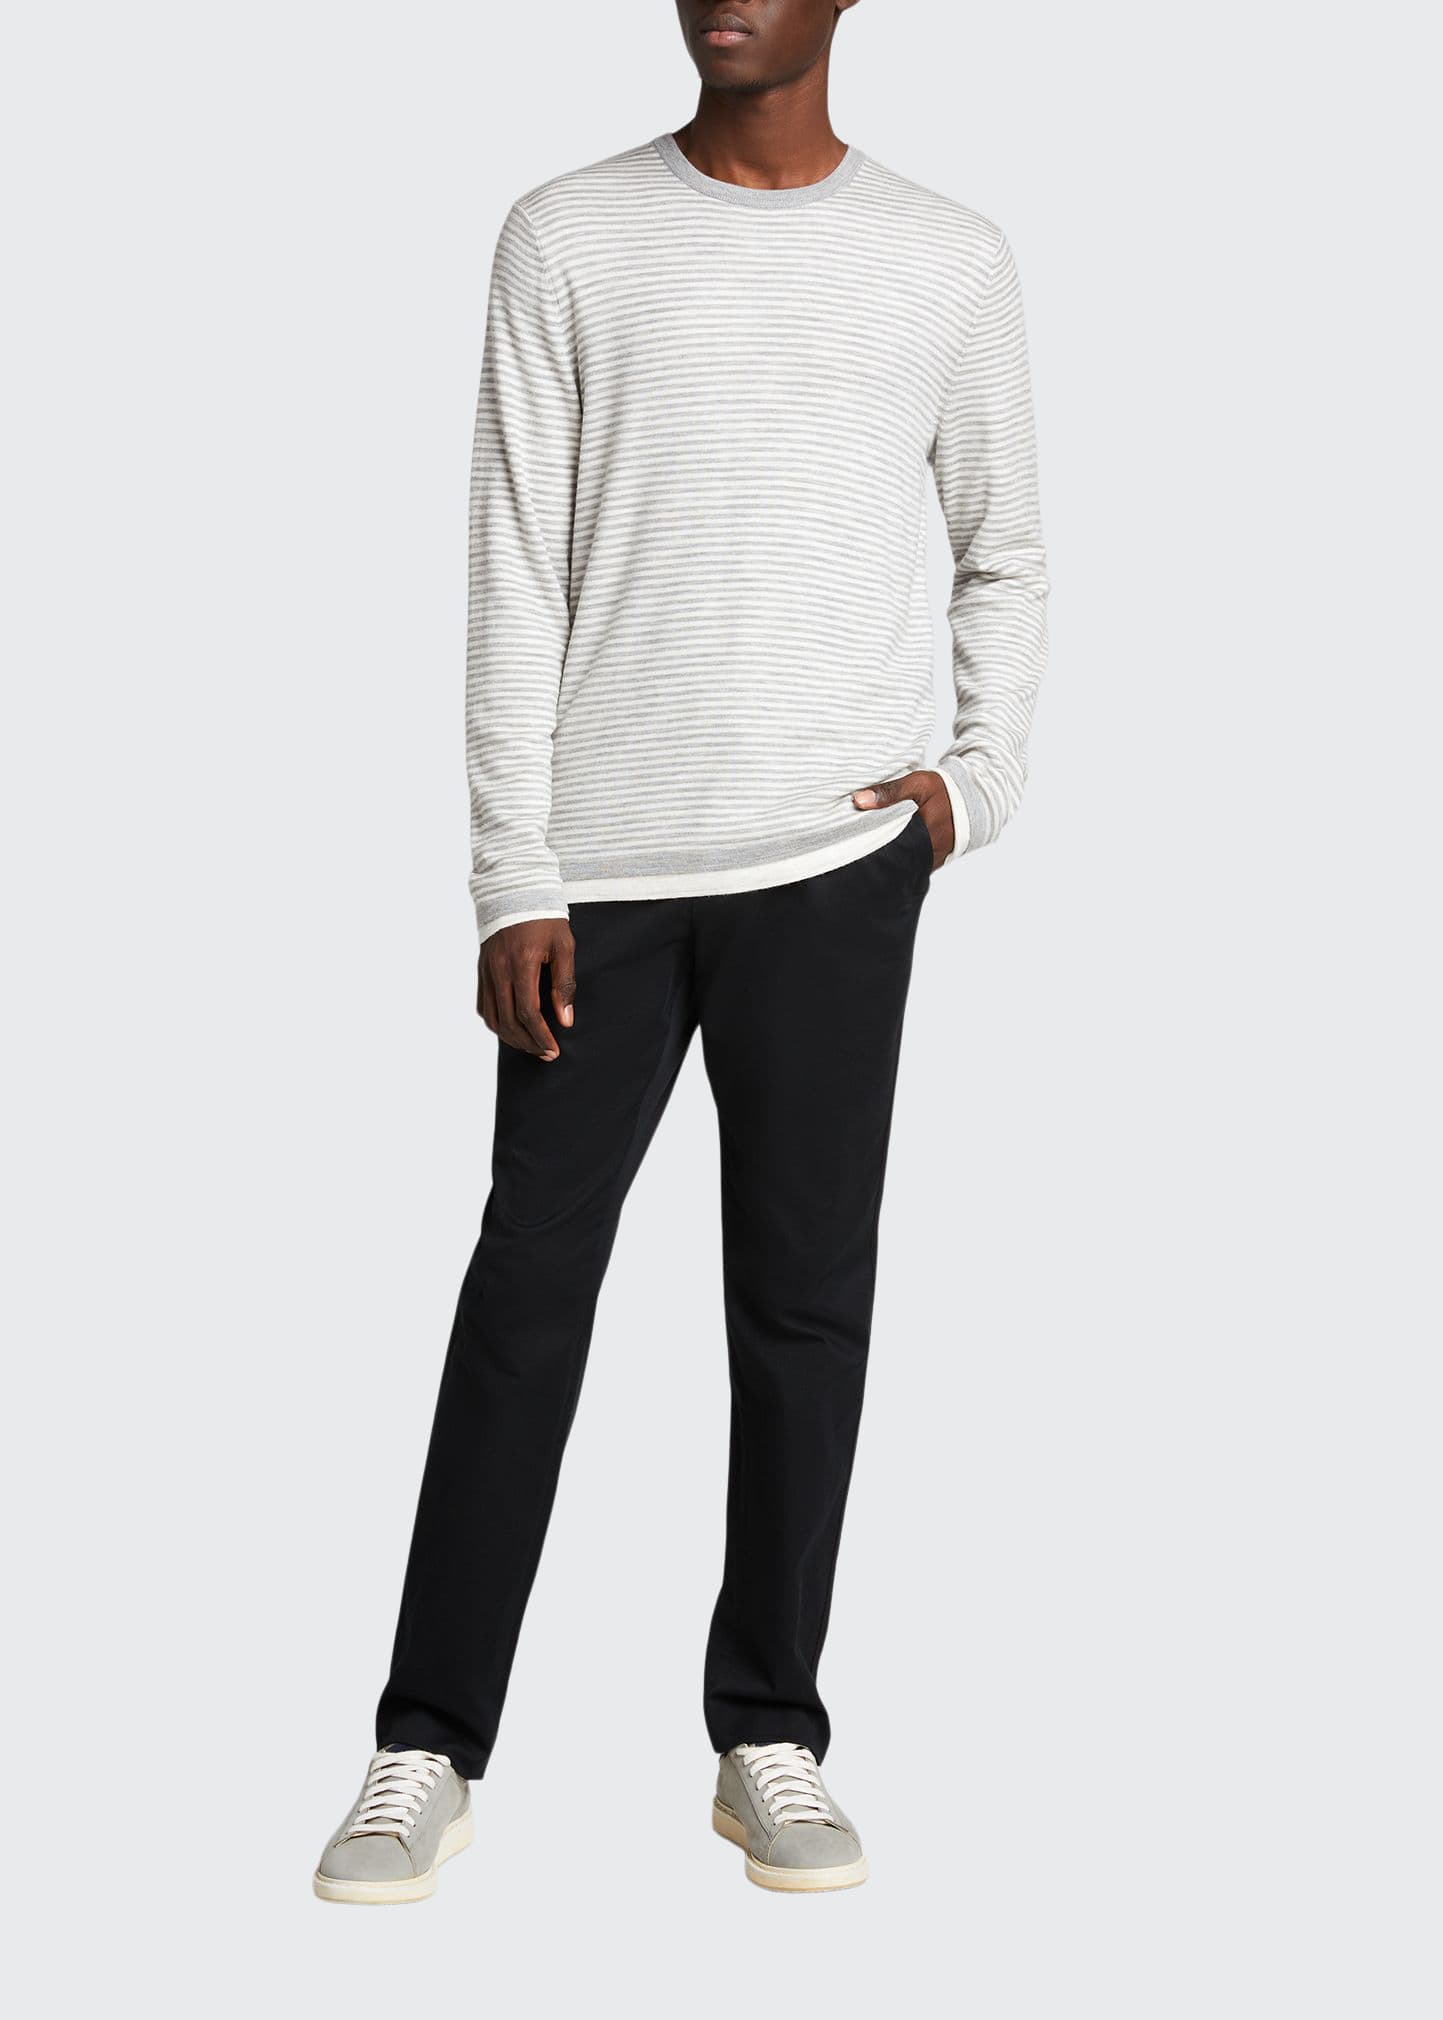 Vince Men's Double-Layer Striped Wool Sweater